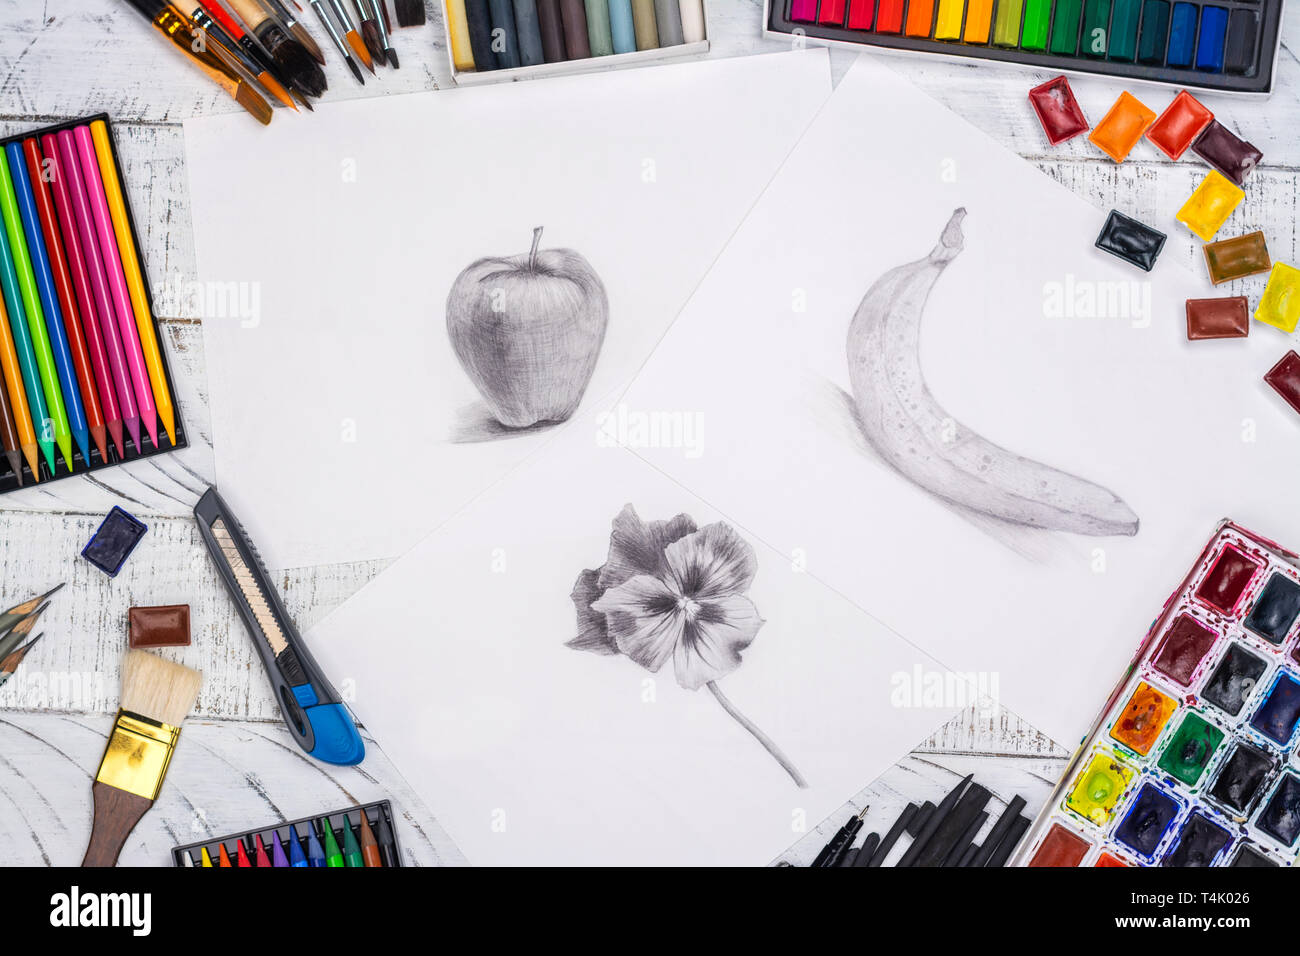 Pencil sketch of an apple Stock Photo